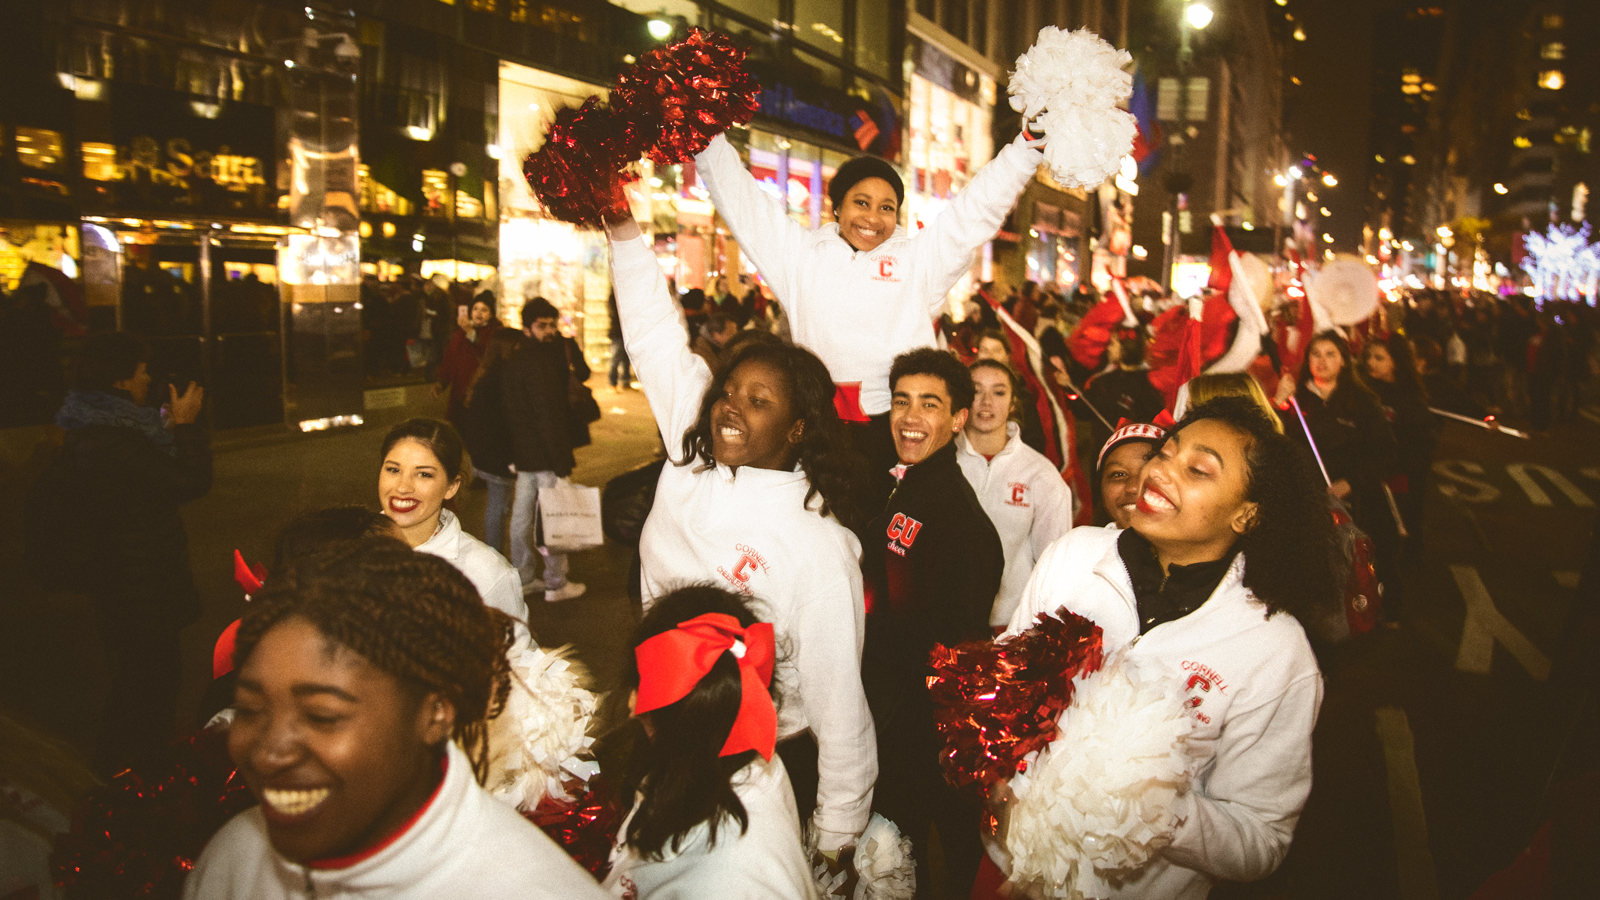 Cheerleaders march in the Sy Katz Parade in New York City in 2018